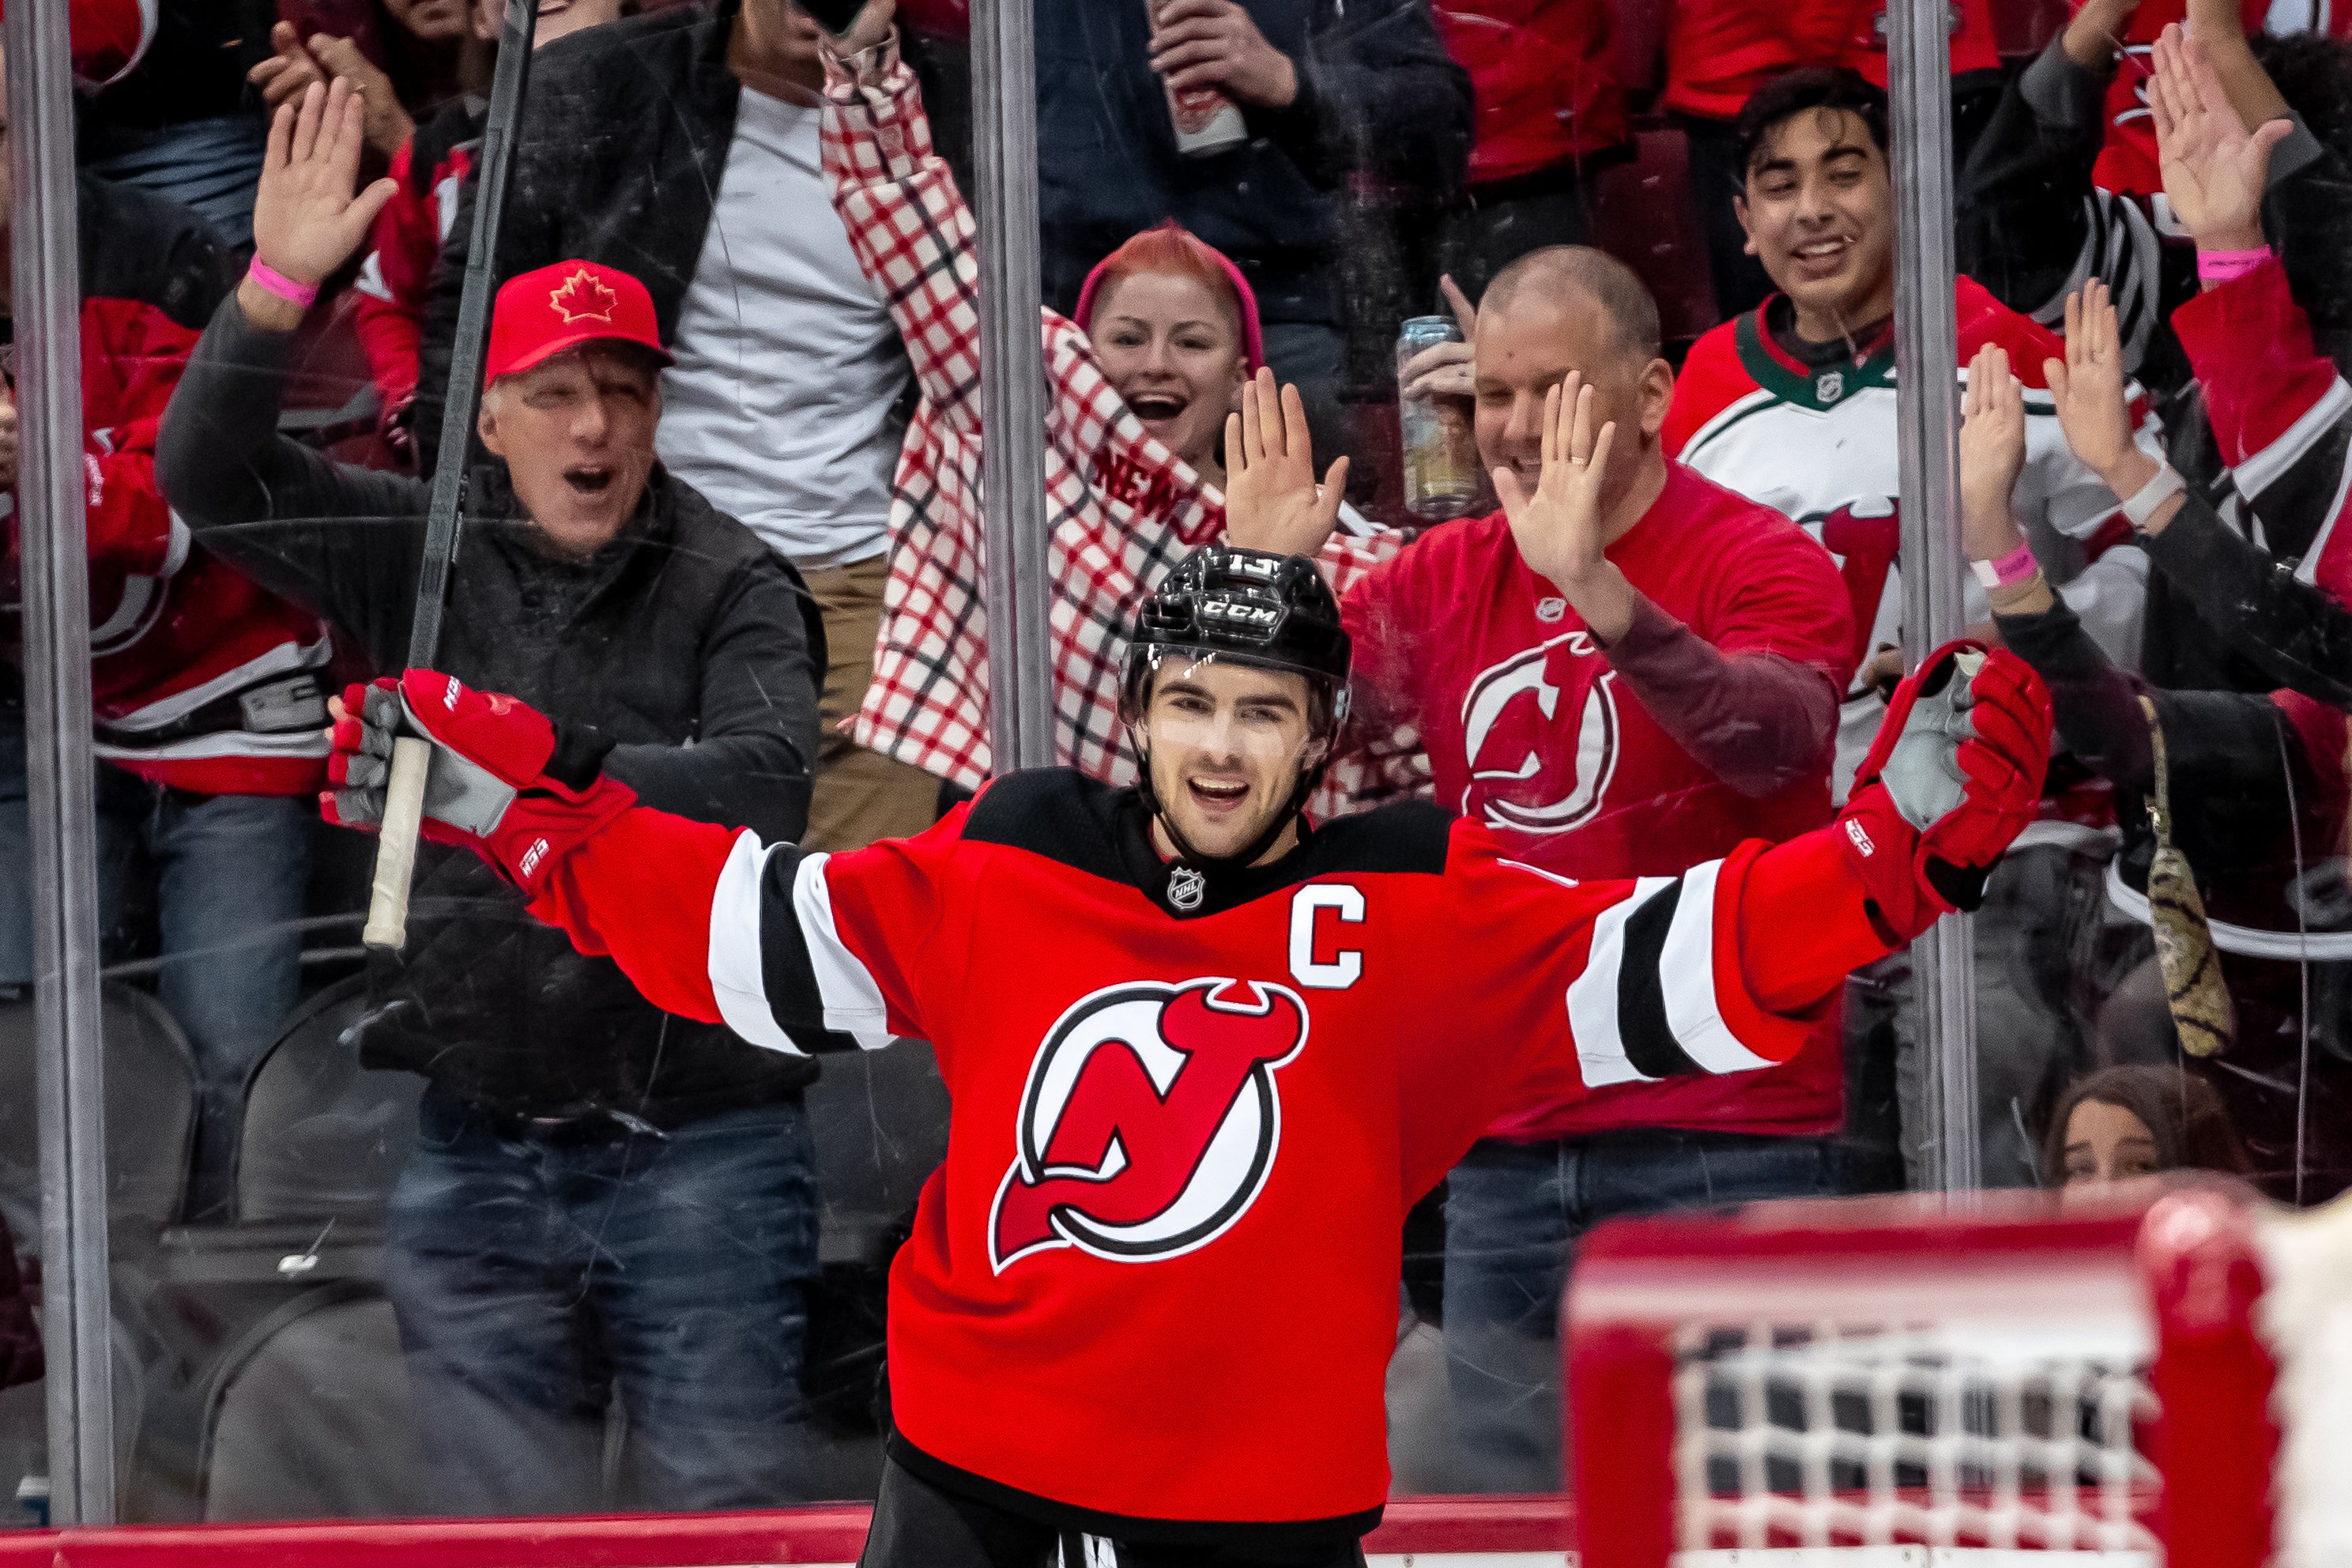 New Jersey Devils - Last year, #NJDevils fans came together and donated  32,000 lbs. of food to go towards meals for those in need. Let's do more  this year. Learn more about